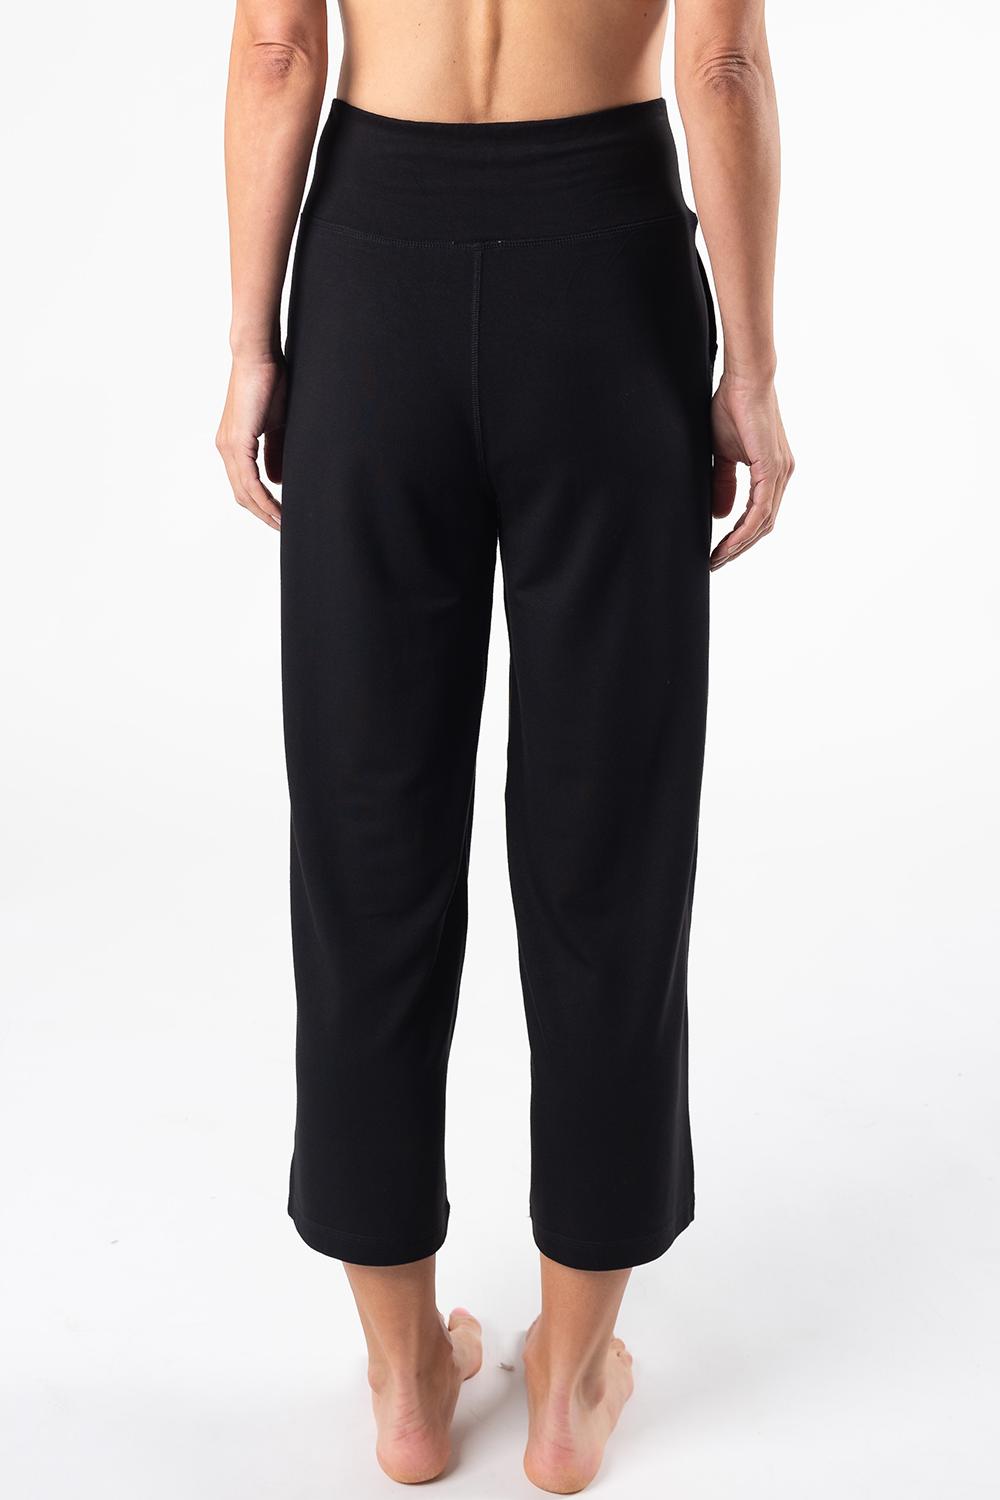 Terrera Dion Cropped Pant